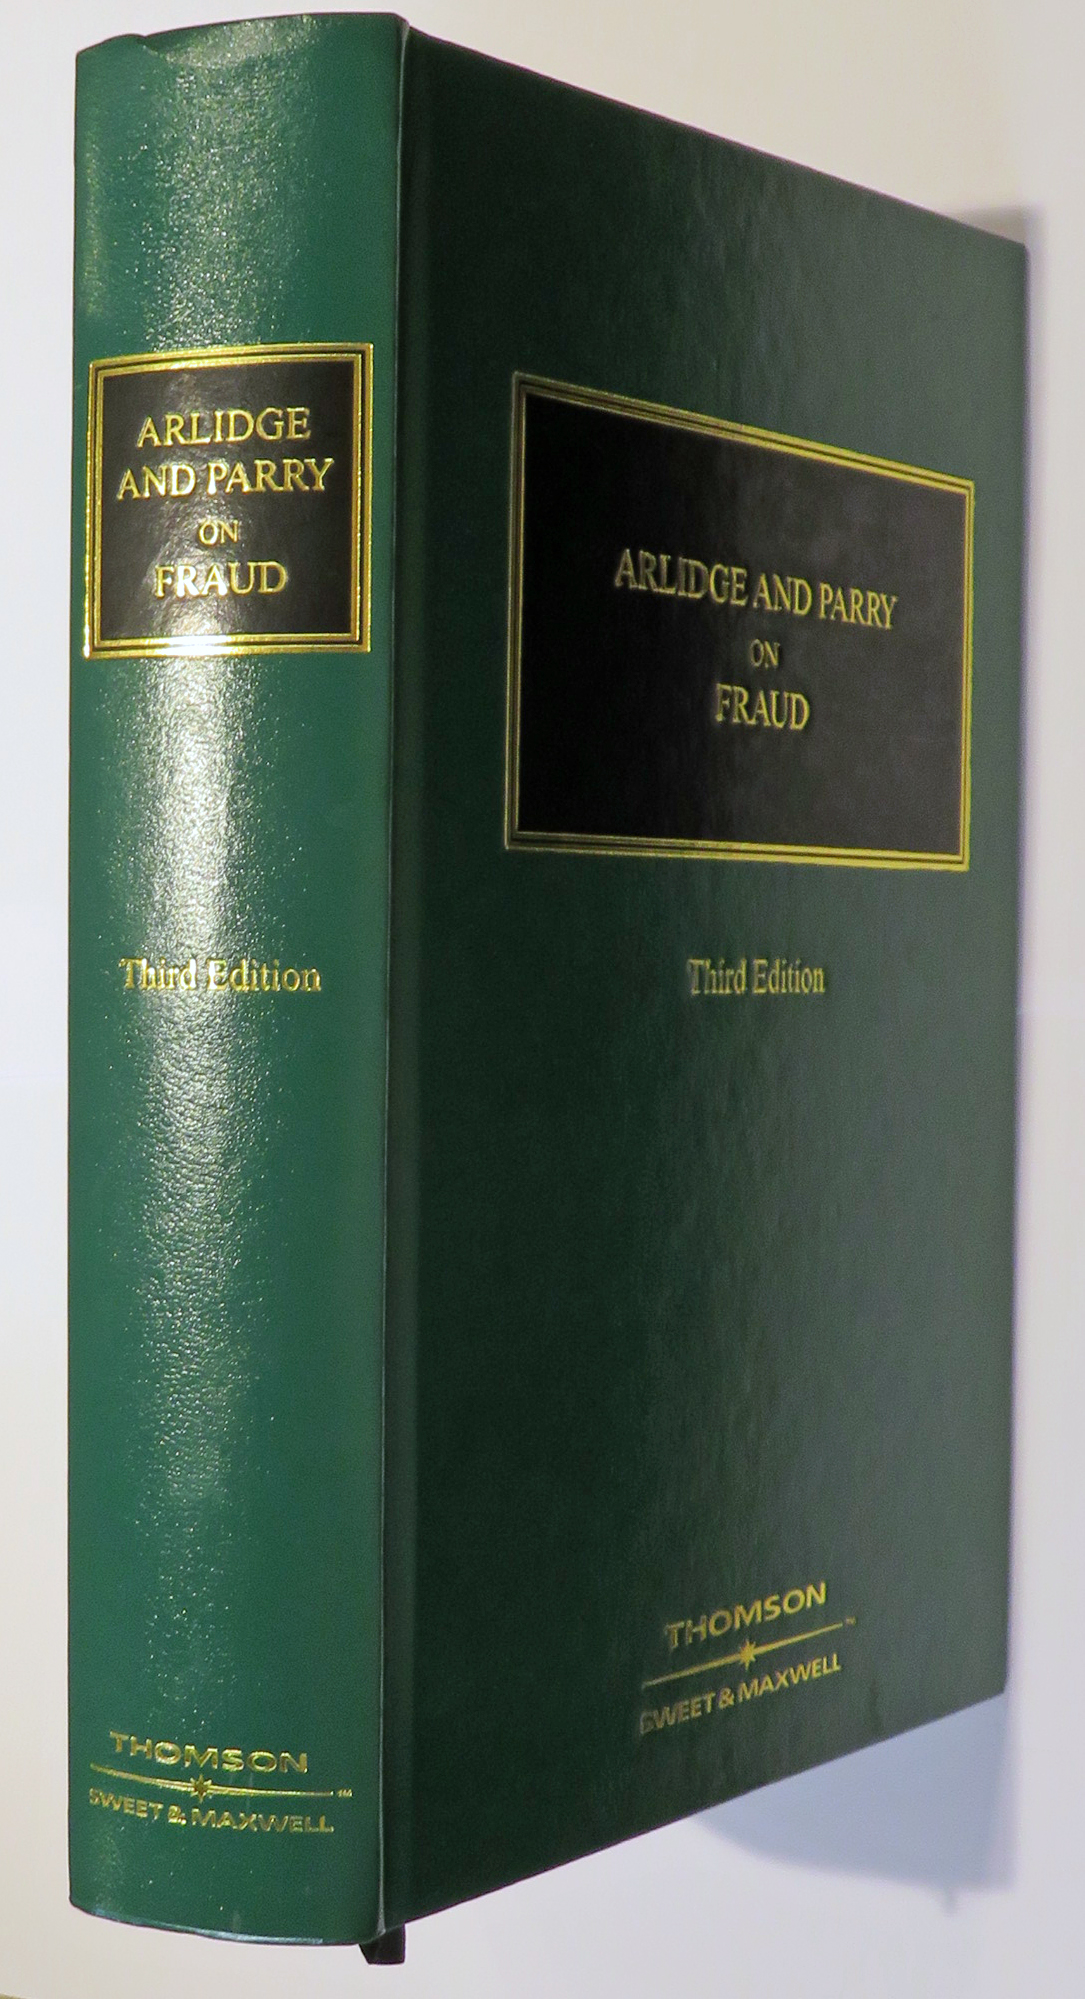 Arlidge and Parry on Fraud. Third Edition.